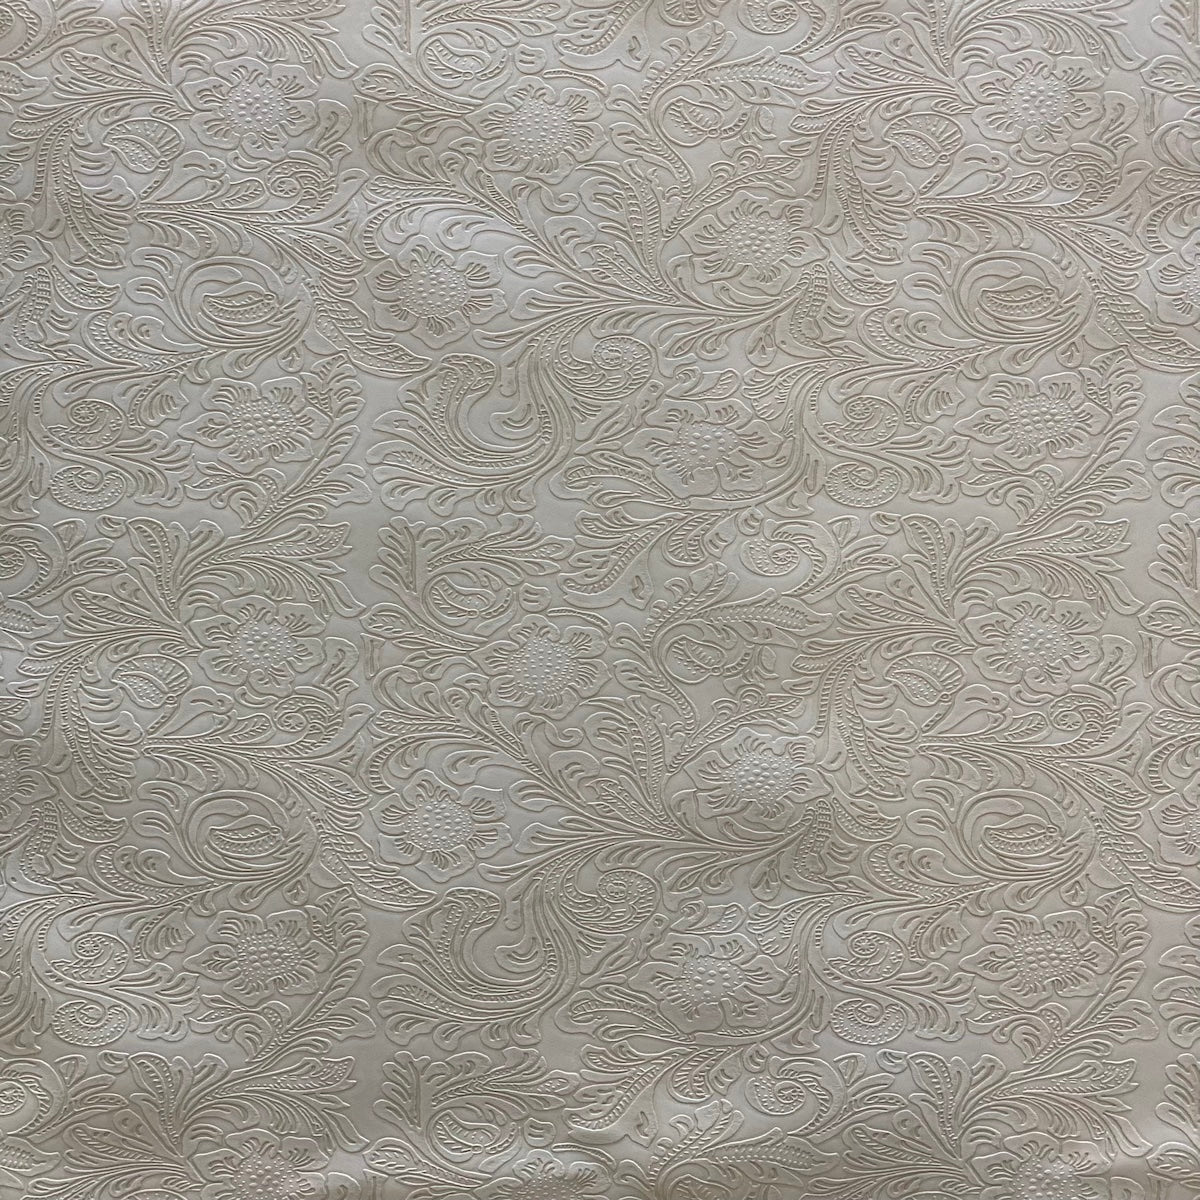 CALLISTO GOLD Faux Leather Upholstery Vinyl Fabric